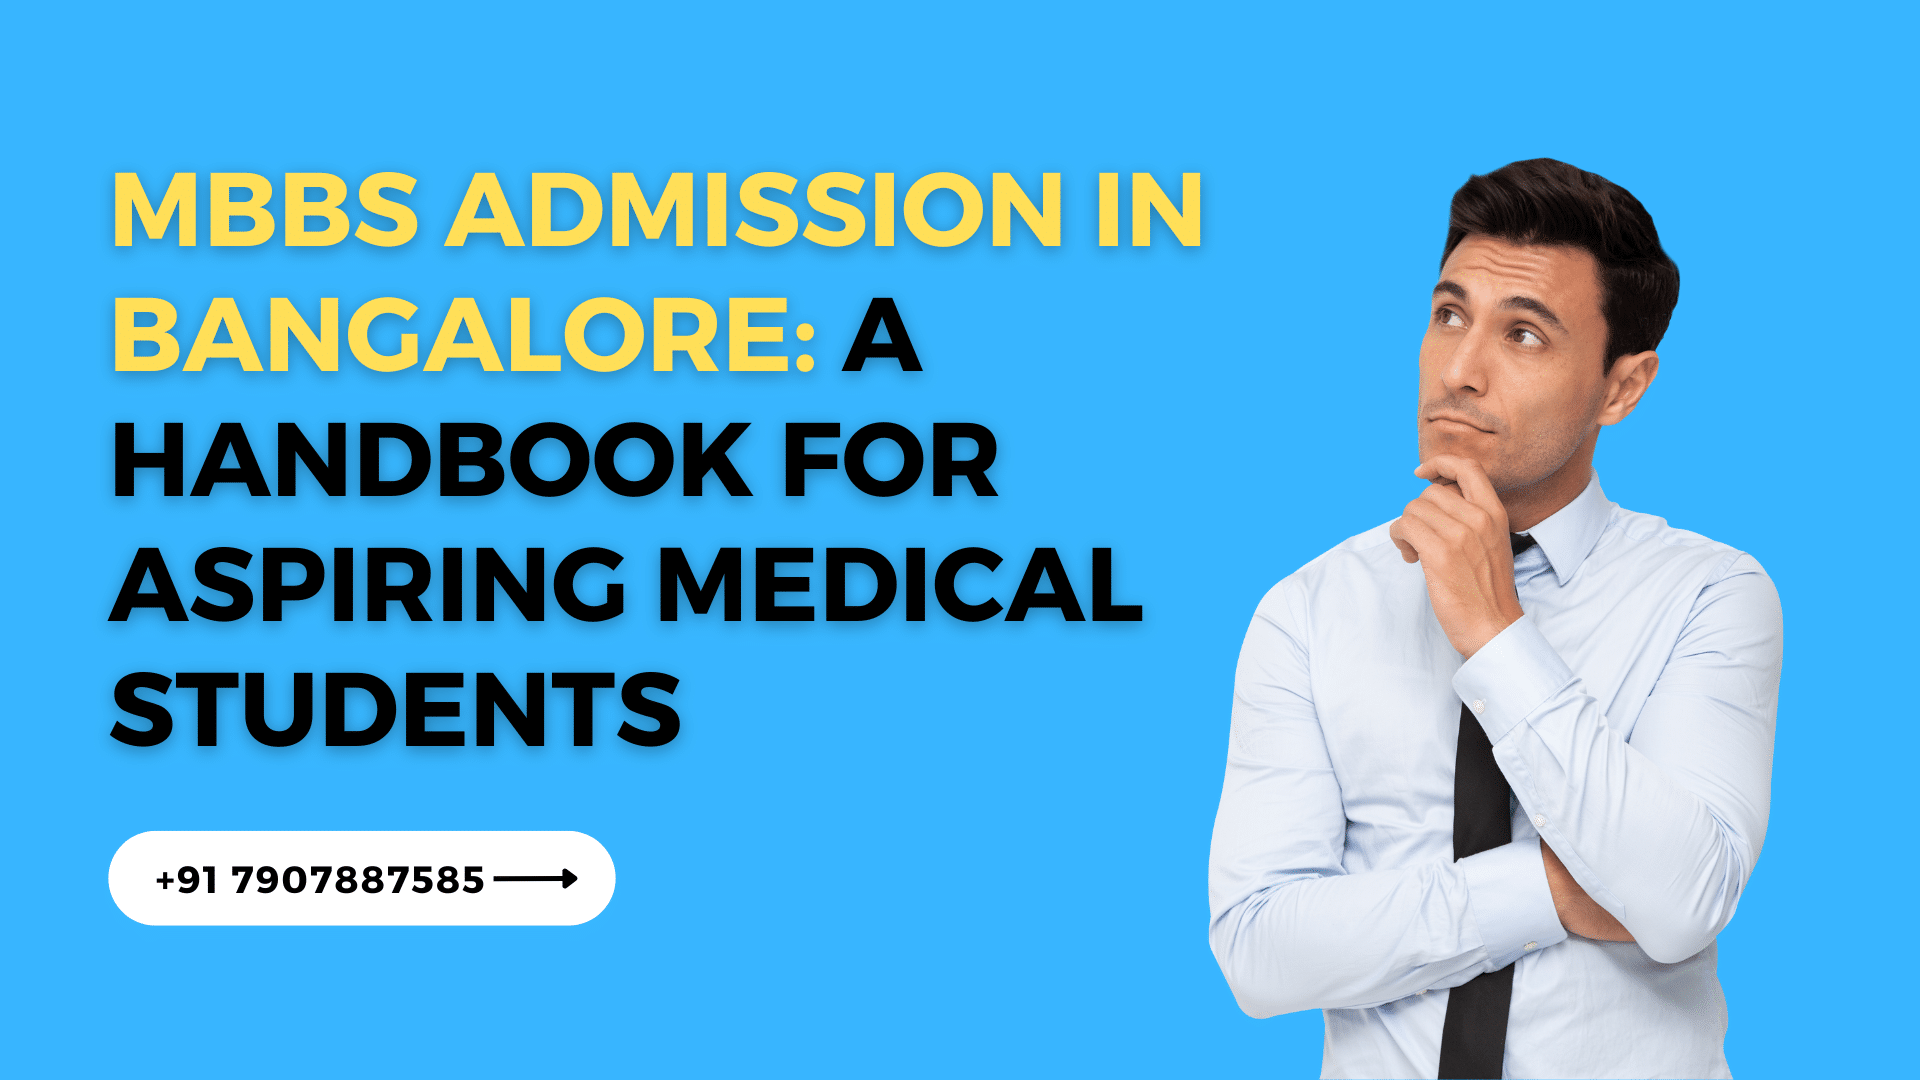 MBBS admission in Bangalore